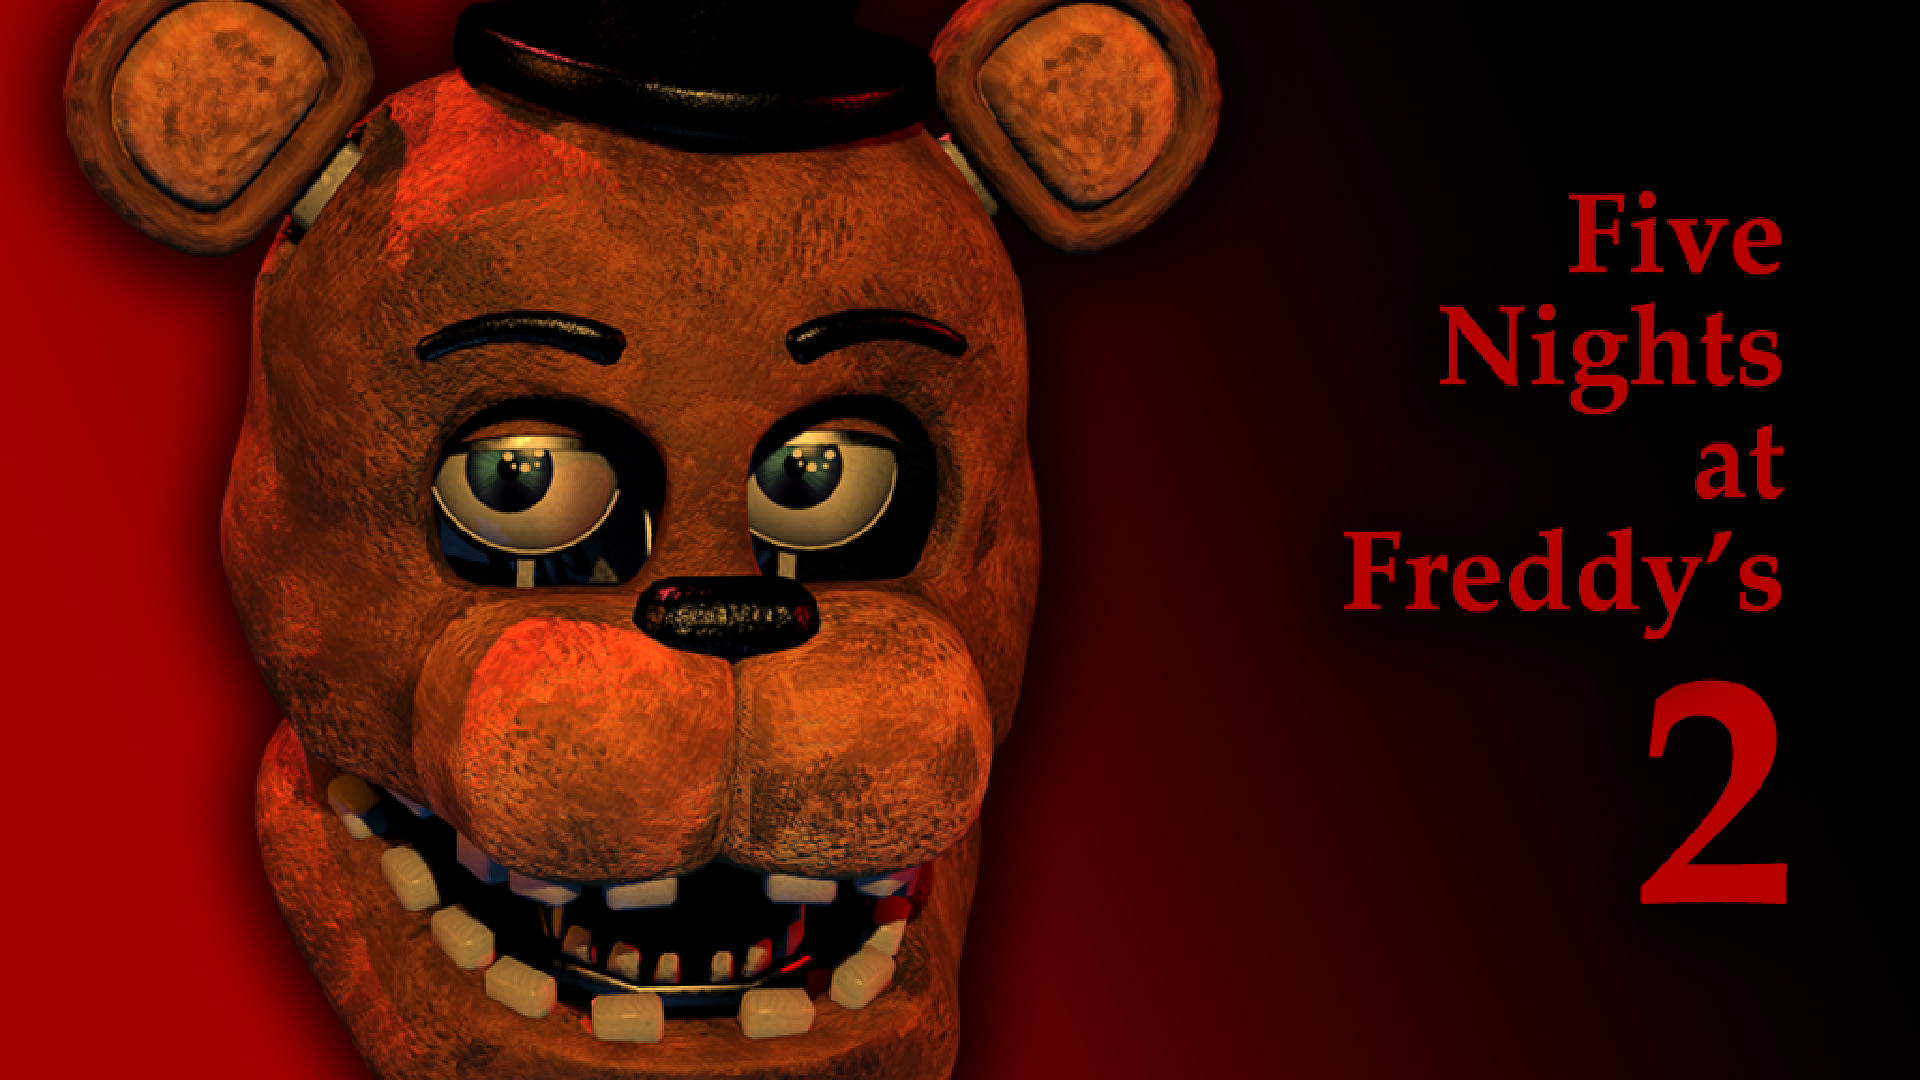 Image Five Nights at Freddy's 2